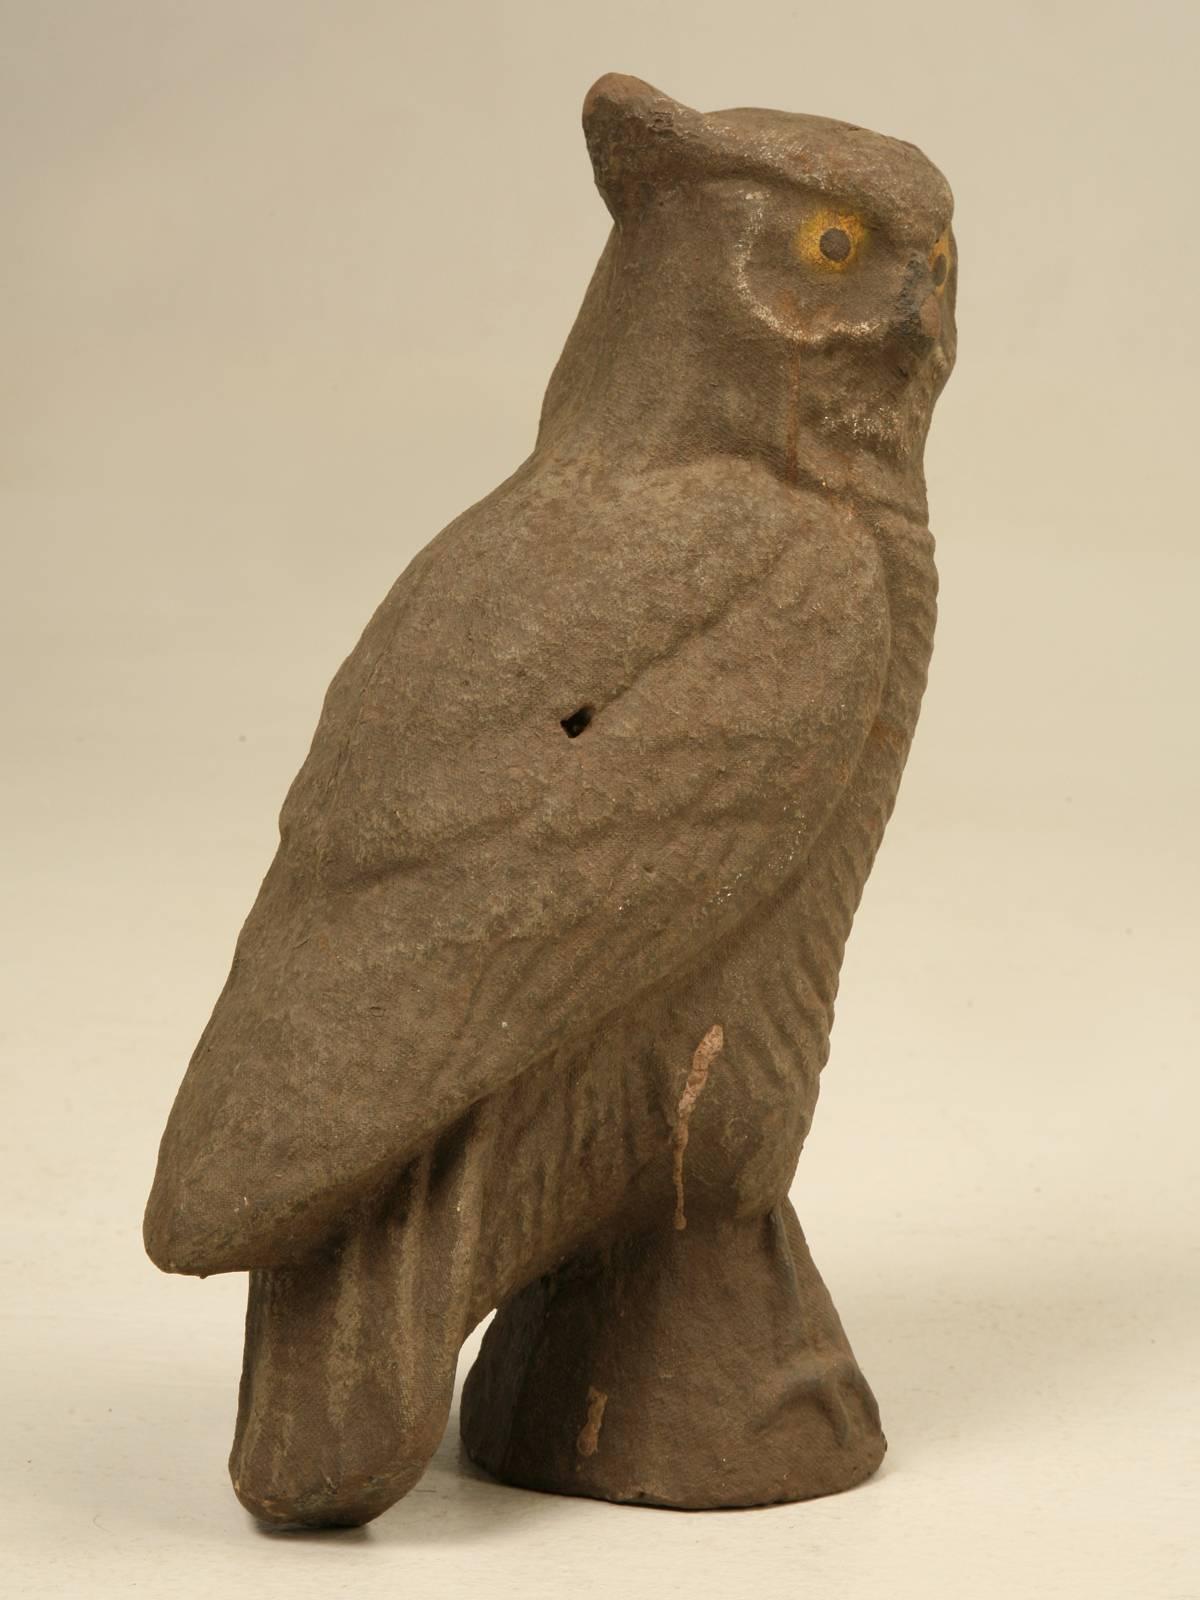 An unusual American papier mâché owl, from around the turn of the century that was probably used outdoors to scare small birds away from the garden. Not is perfect condition, but very presentable never the less.